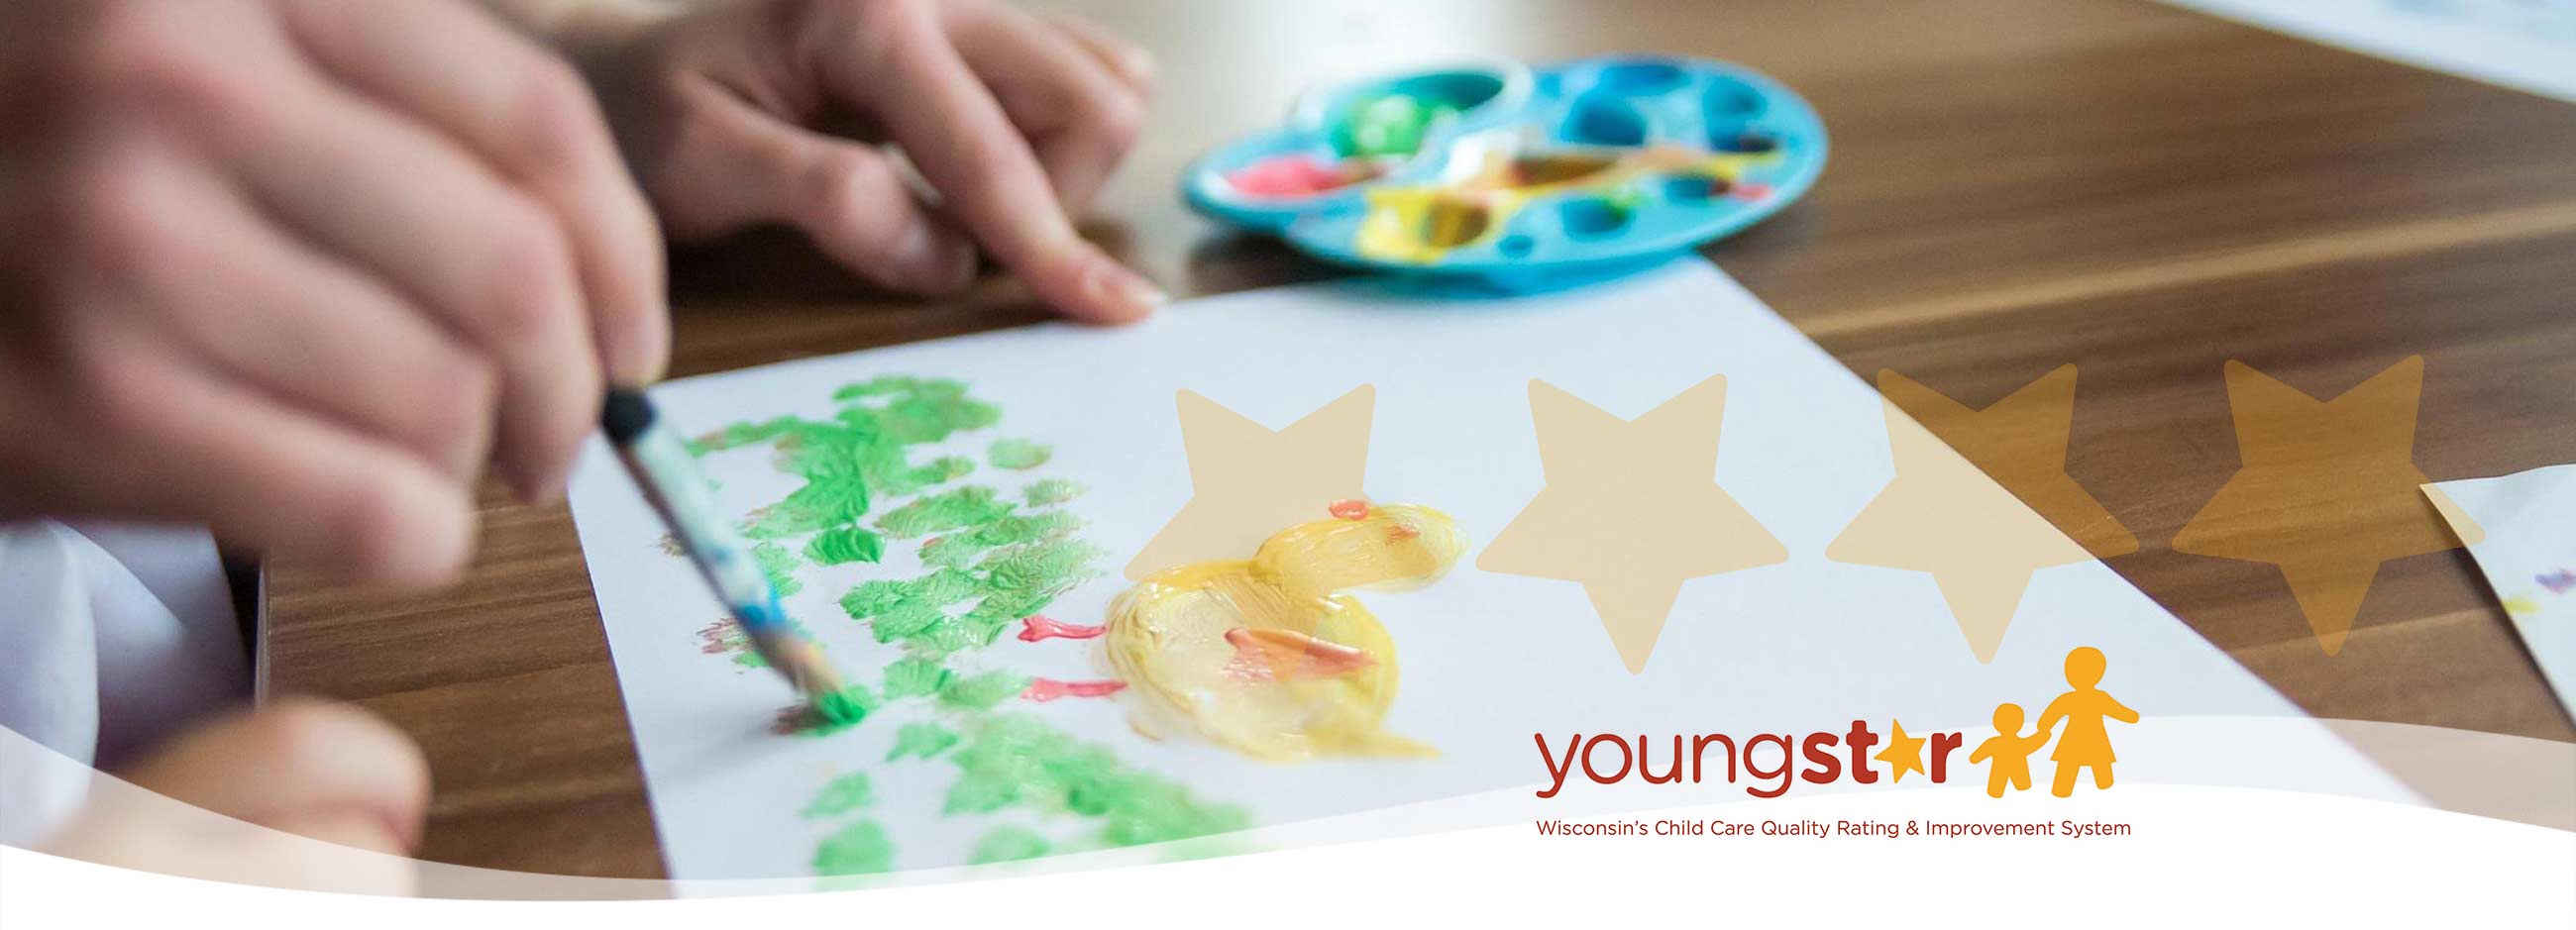 All three of our locations are 4-star rated child care centers